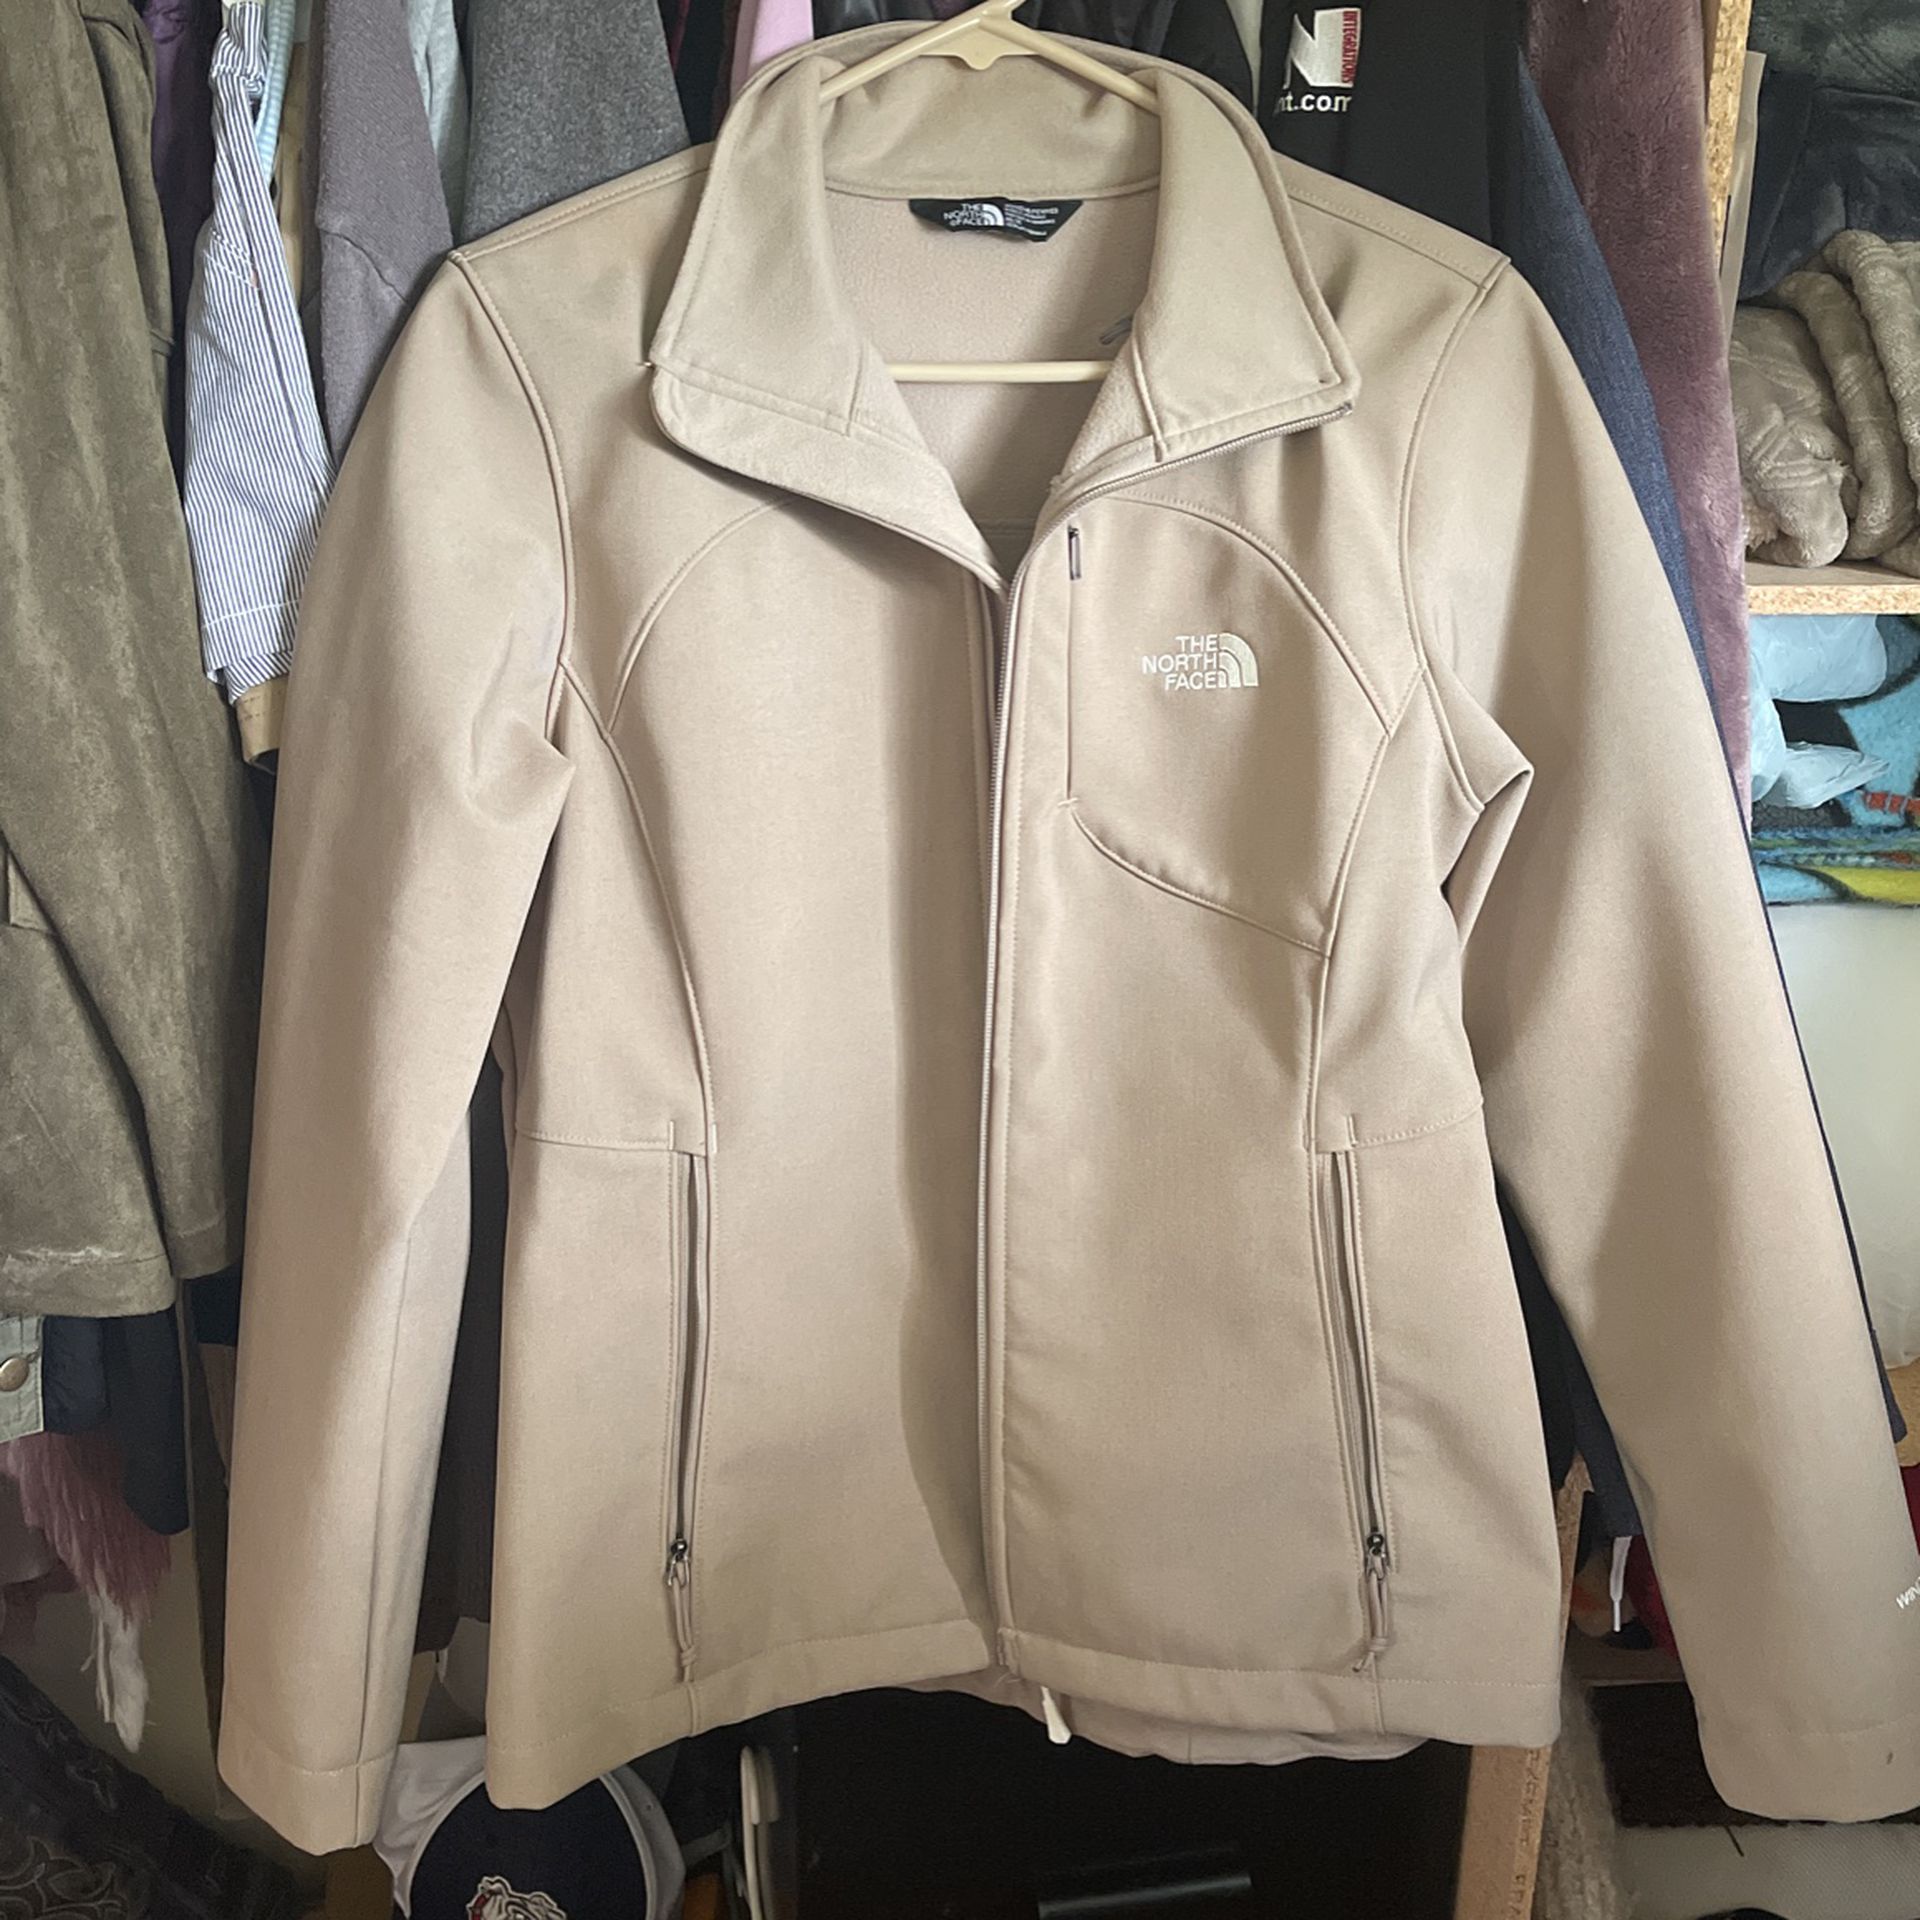 New Lady Jacket  North face 